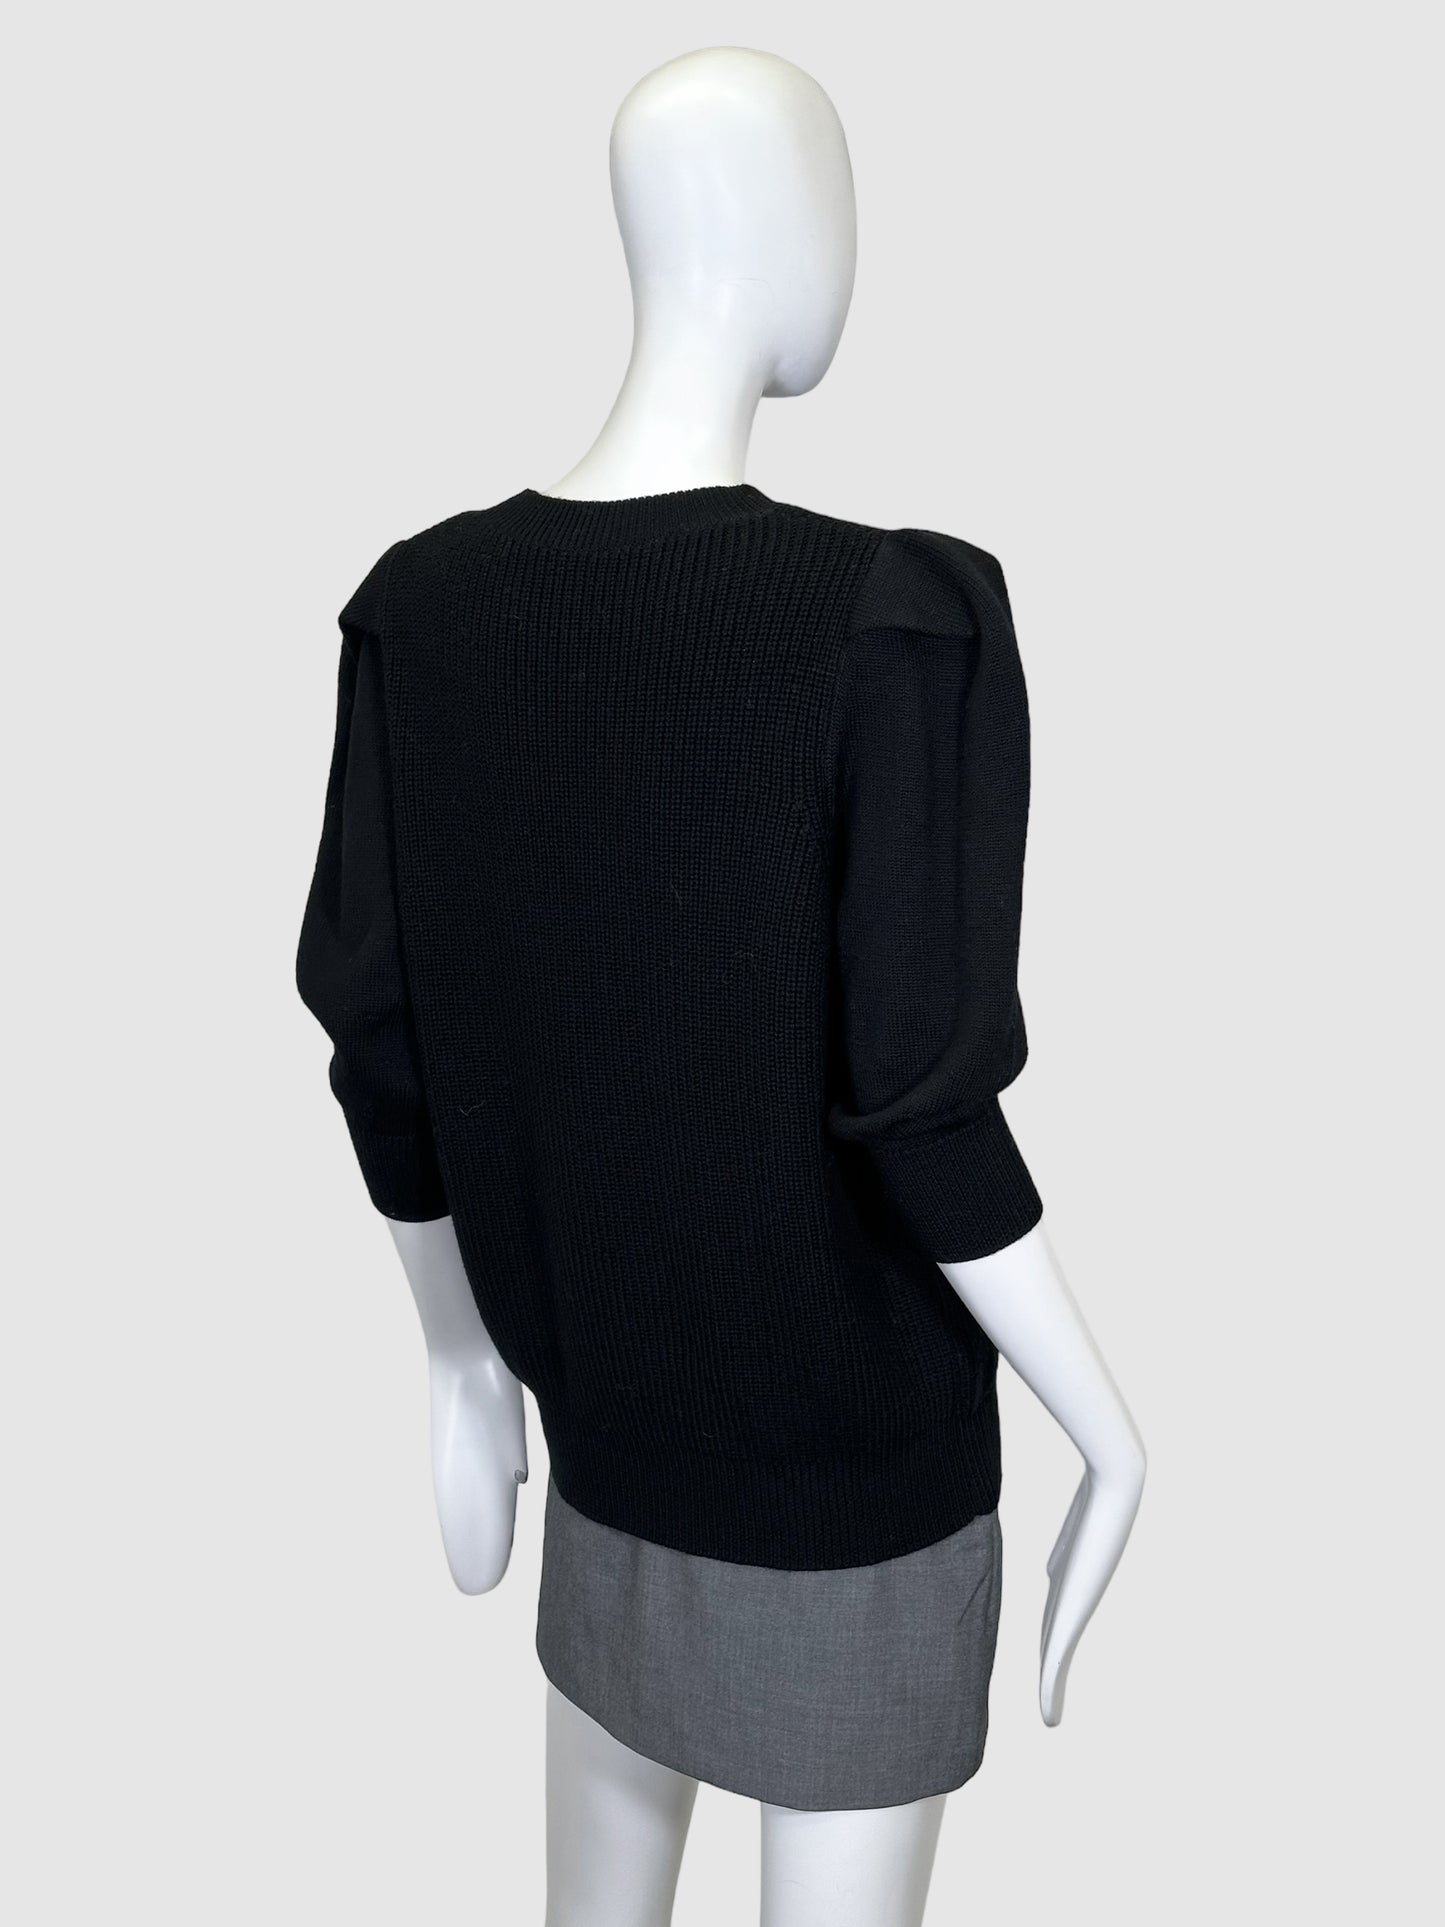 Riani Ribbed Puff-Shoulder Sweater - Size 12